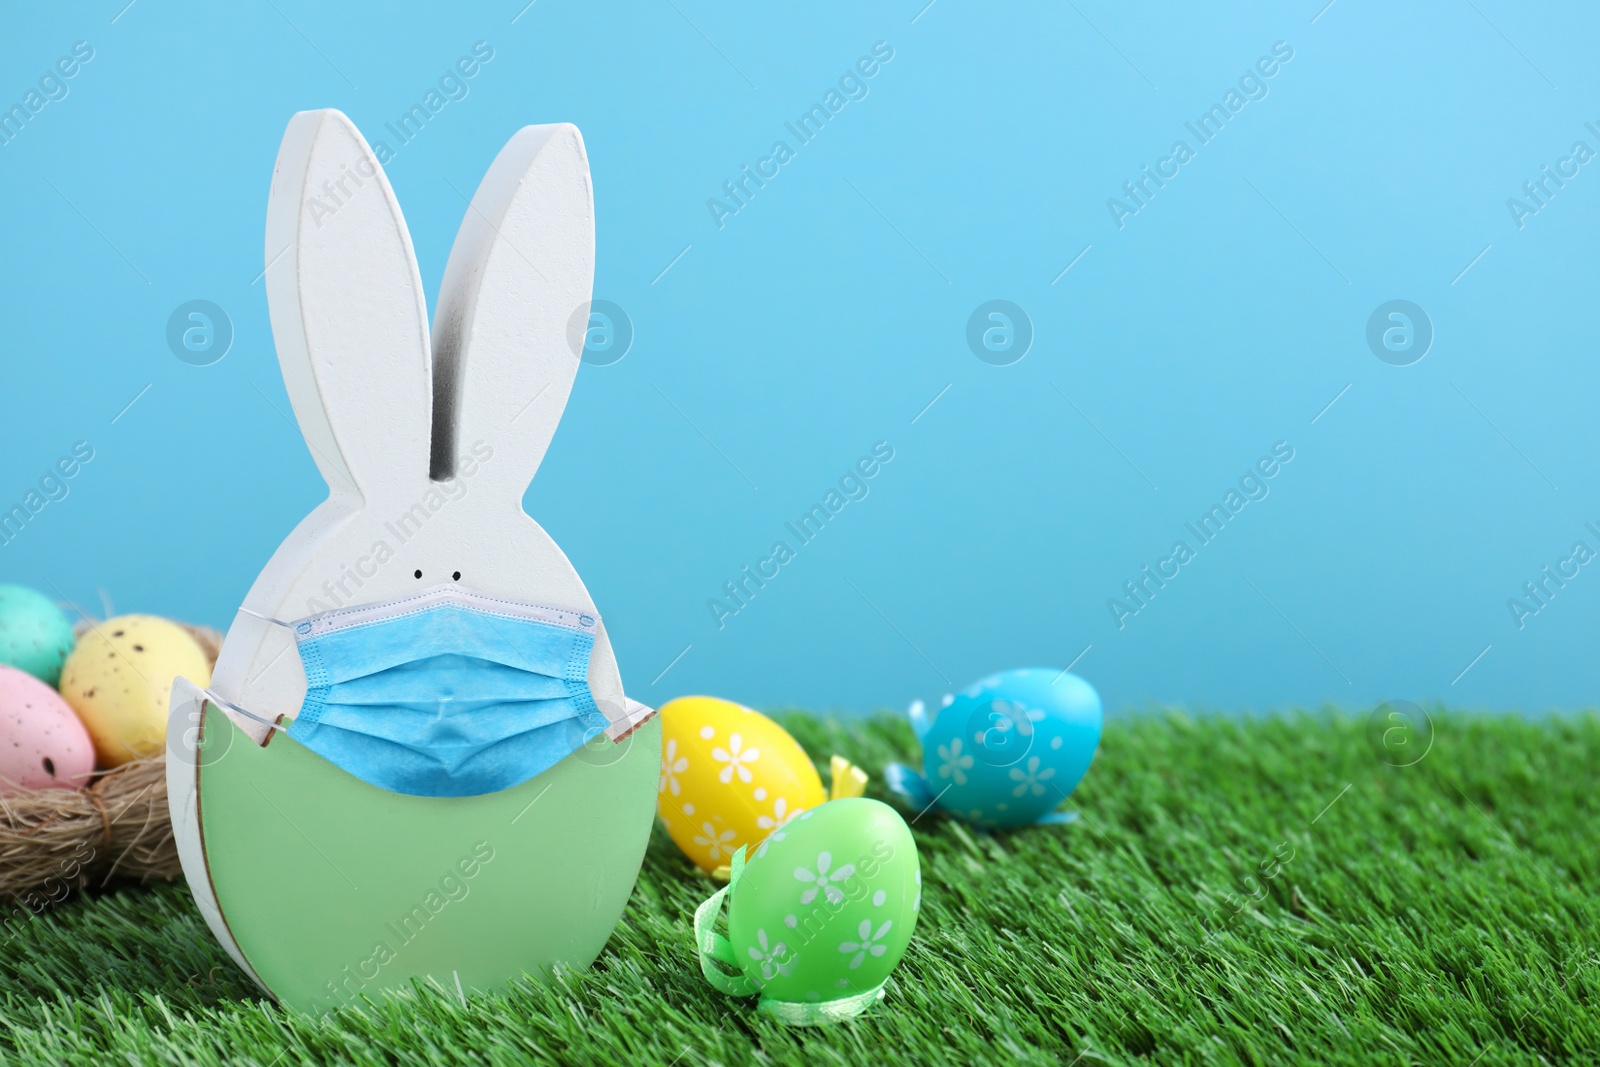 Image of COVID-19 pandemic. Easter bunny figure in protective mask and dyed eggs on green grass against light blue background, space for text